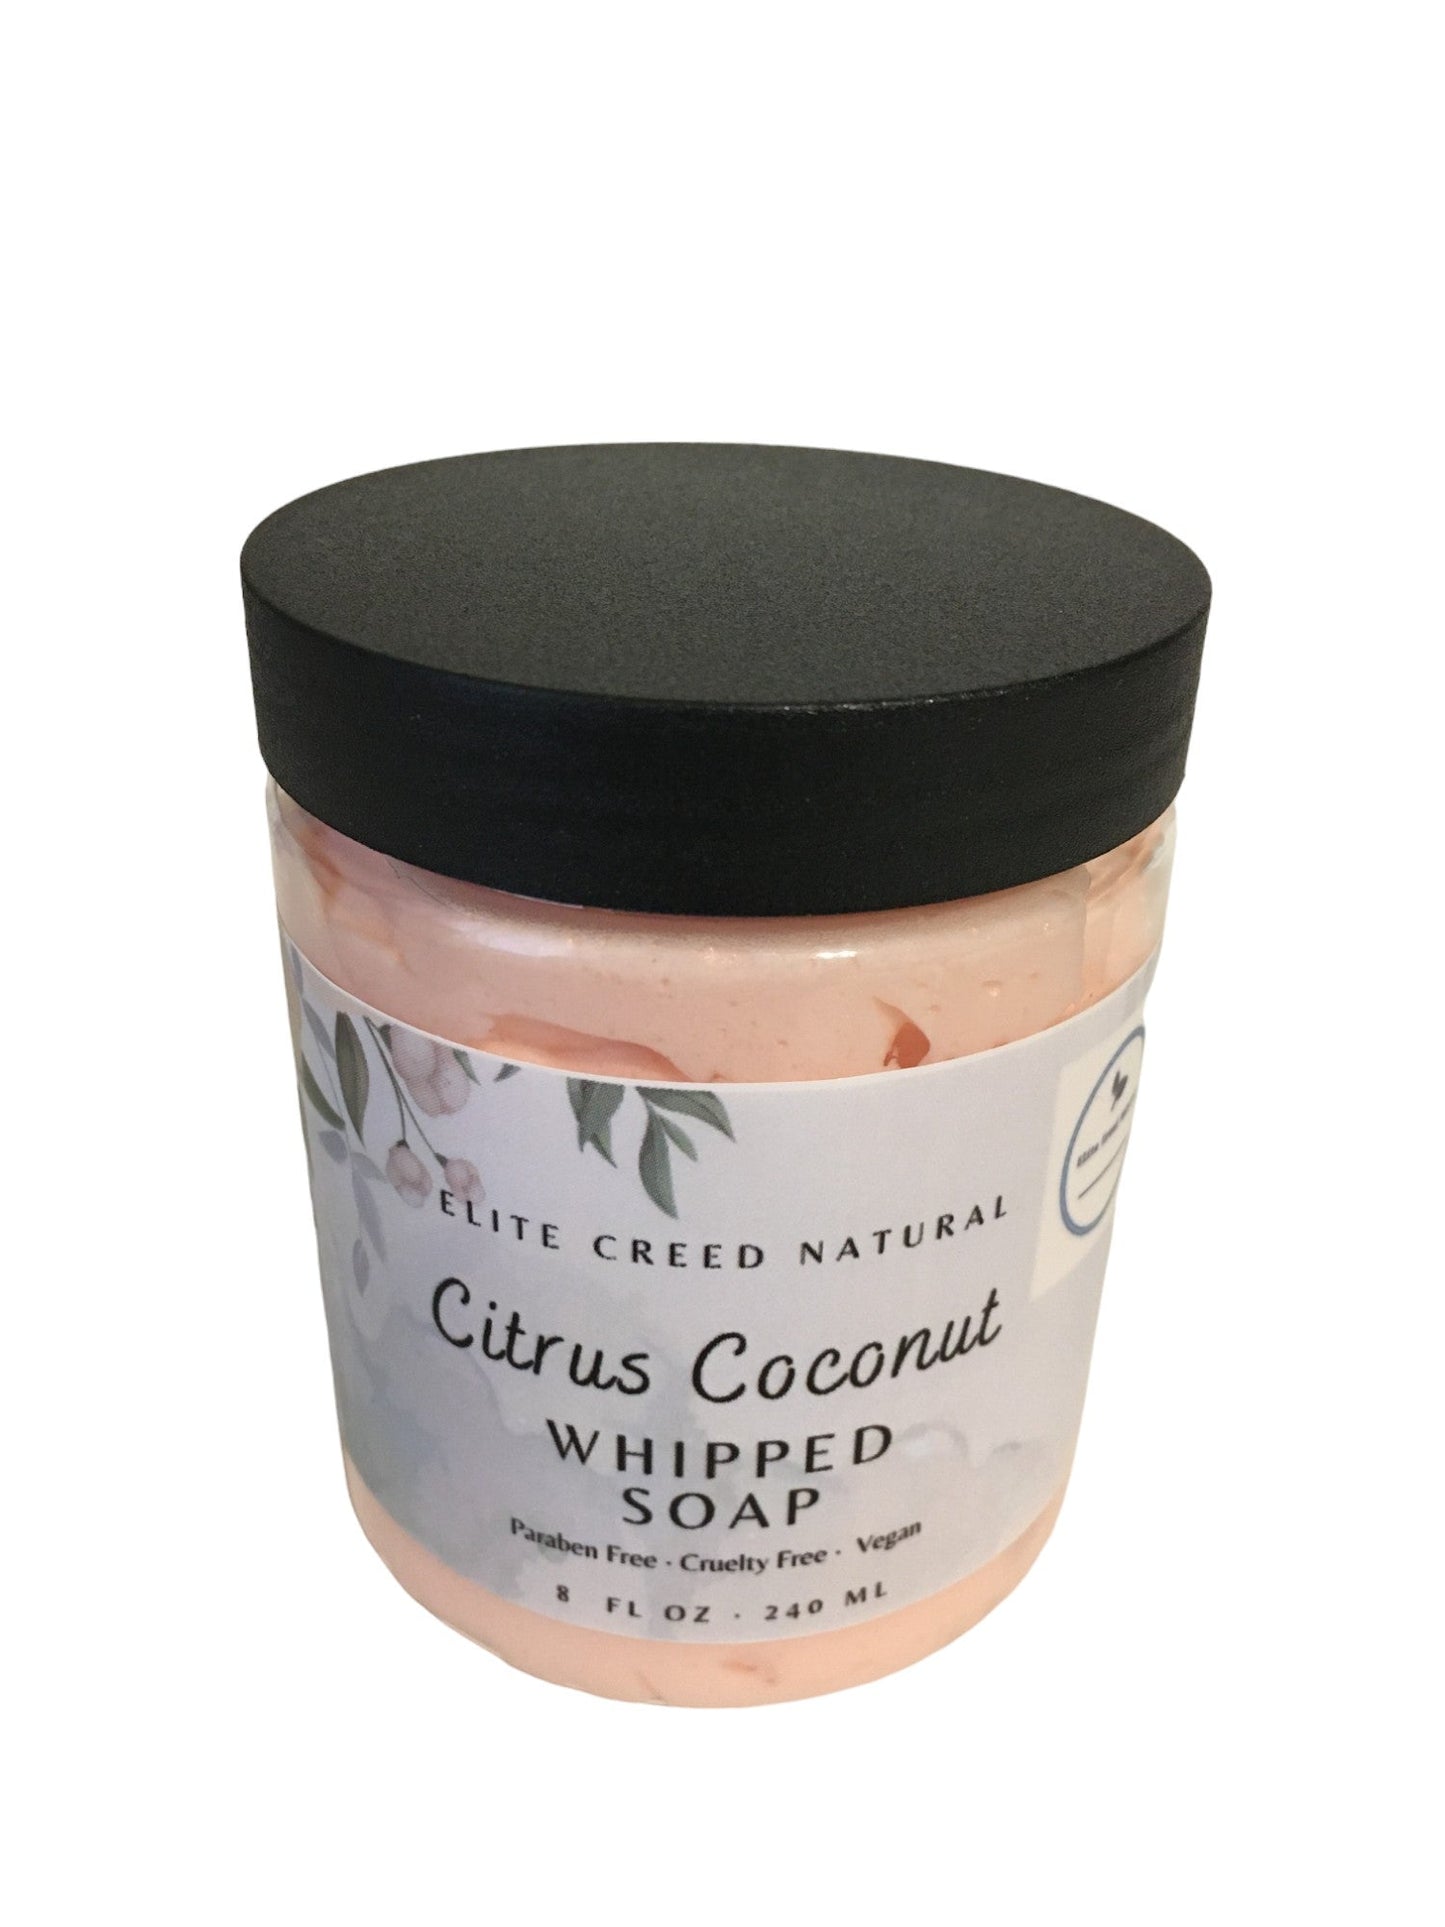 Citrus Coconut Whipped Soap